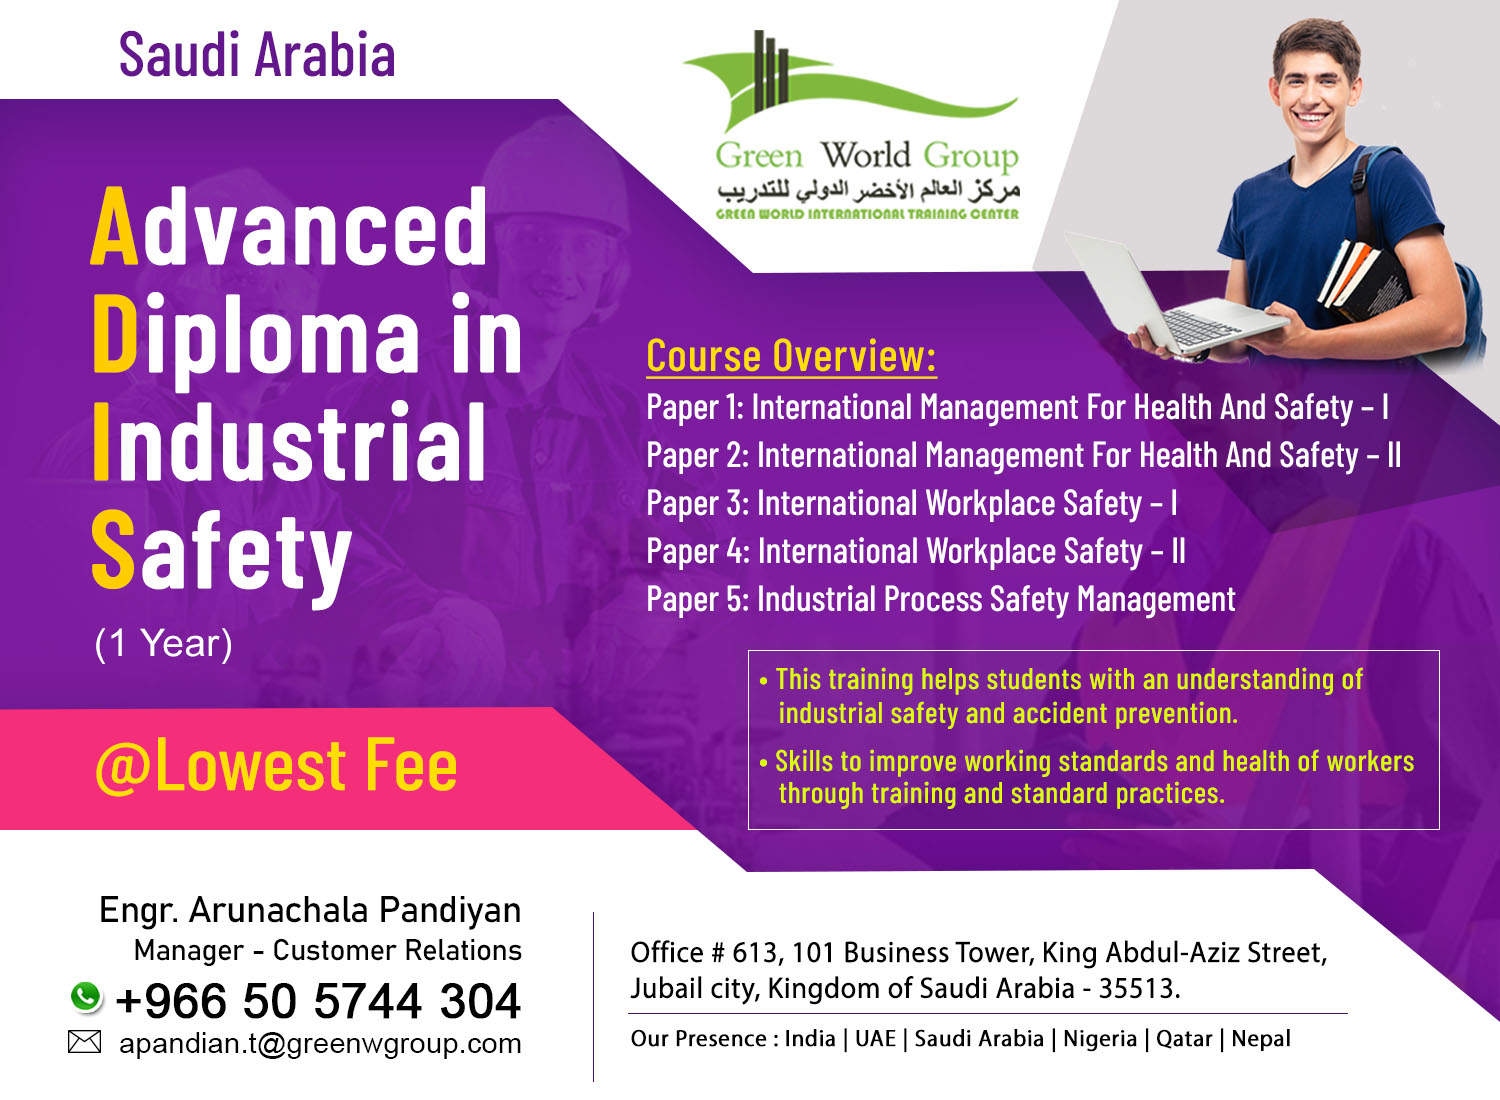 Advanced Diploma in Industrial Safety